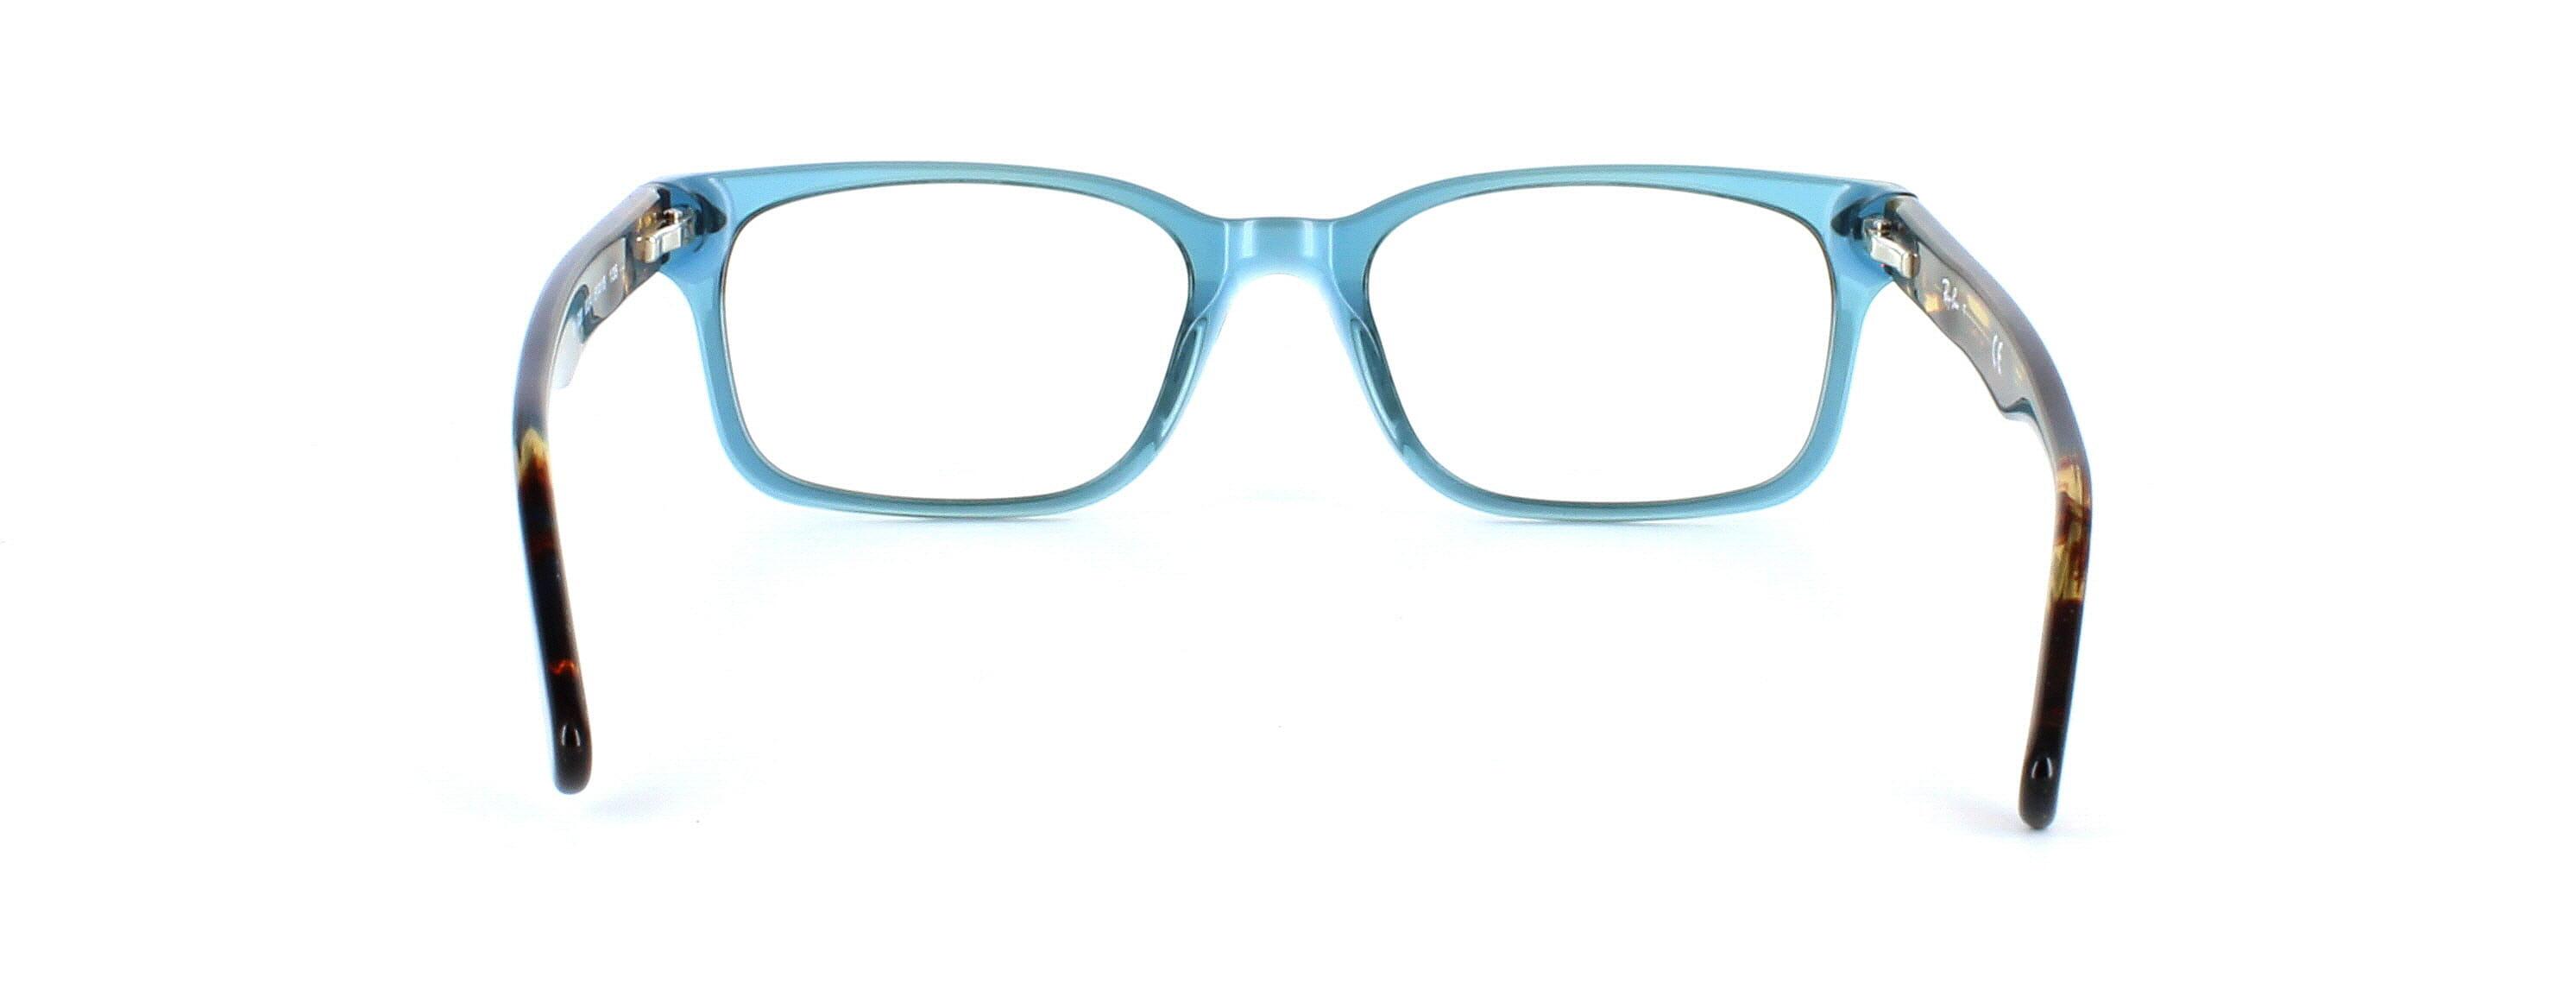 Ray Ban glasses - model 5286 8024 - unisex acetate clear blue and tortoise - image 4